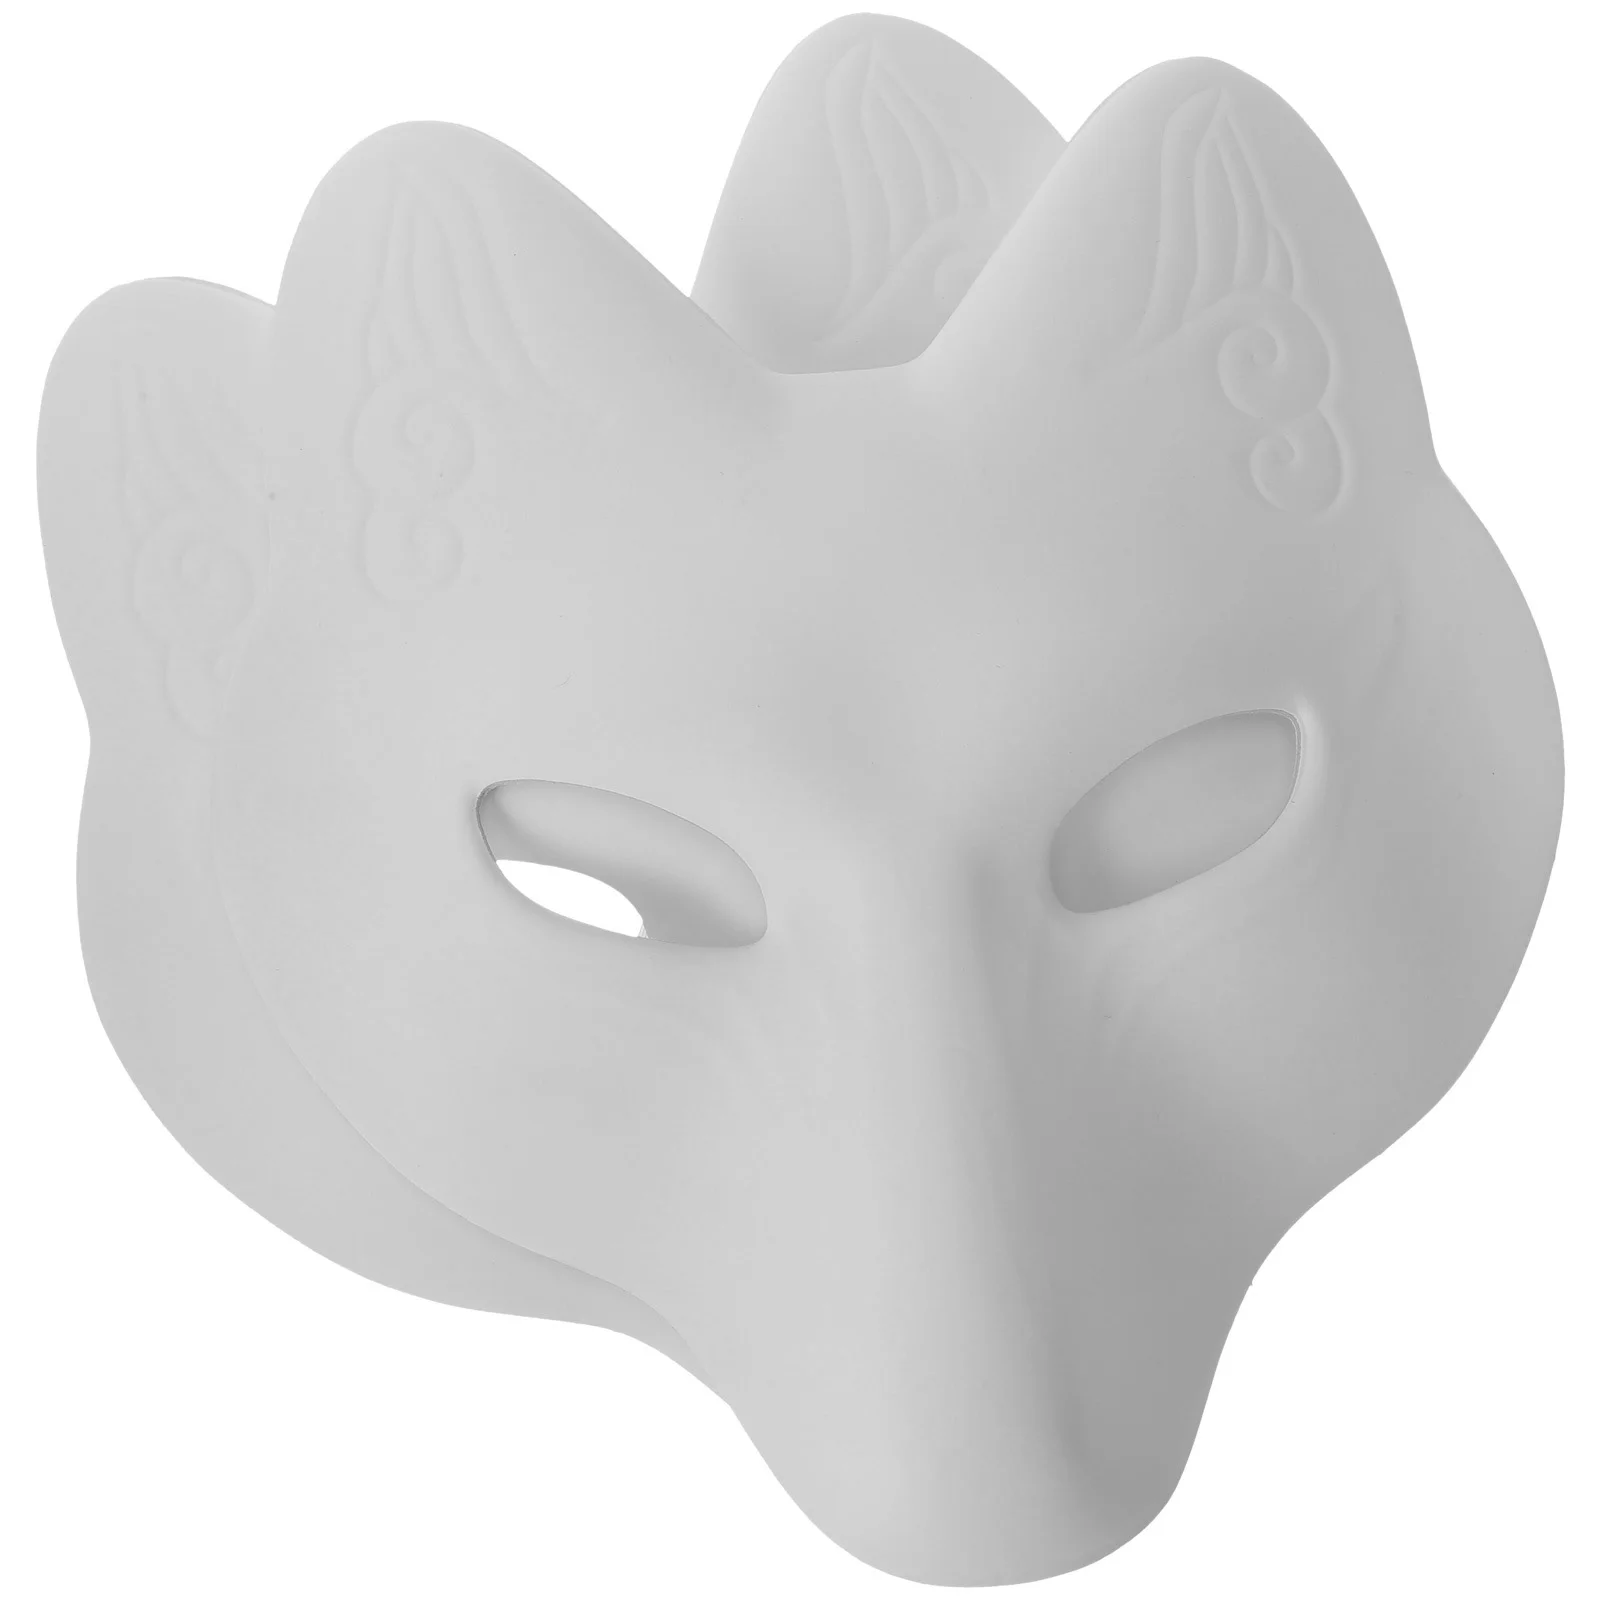 

Mask Masks Fox Masquerade Halloween Costume Cosplay Blank Cat Diy White Animal Eye Wolf Therian Party Face Half Paper Japanese